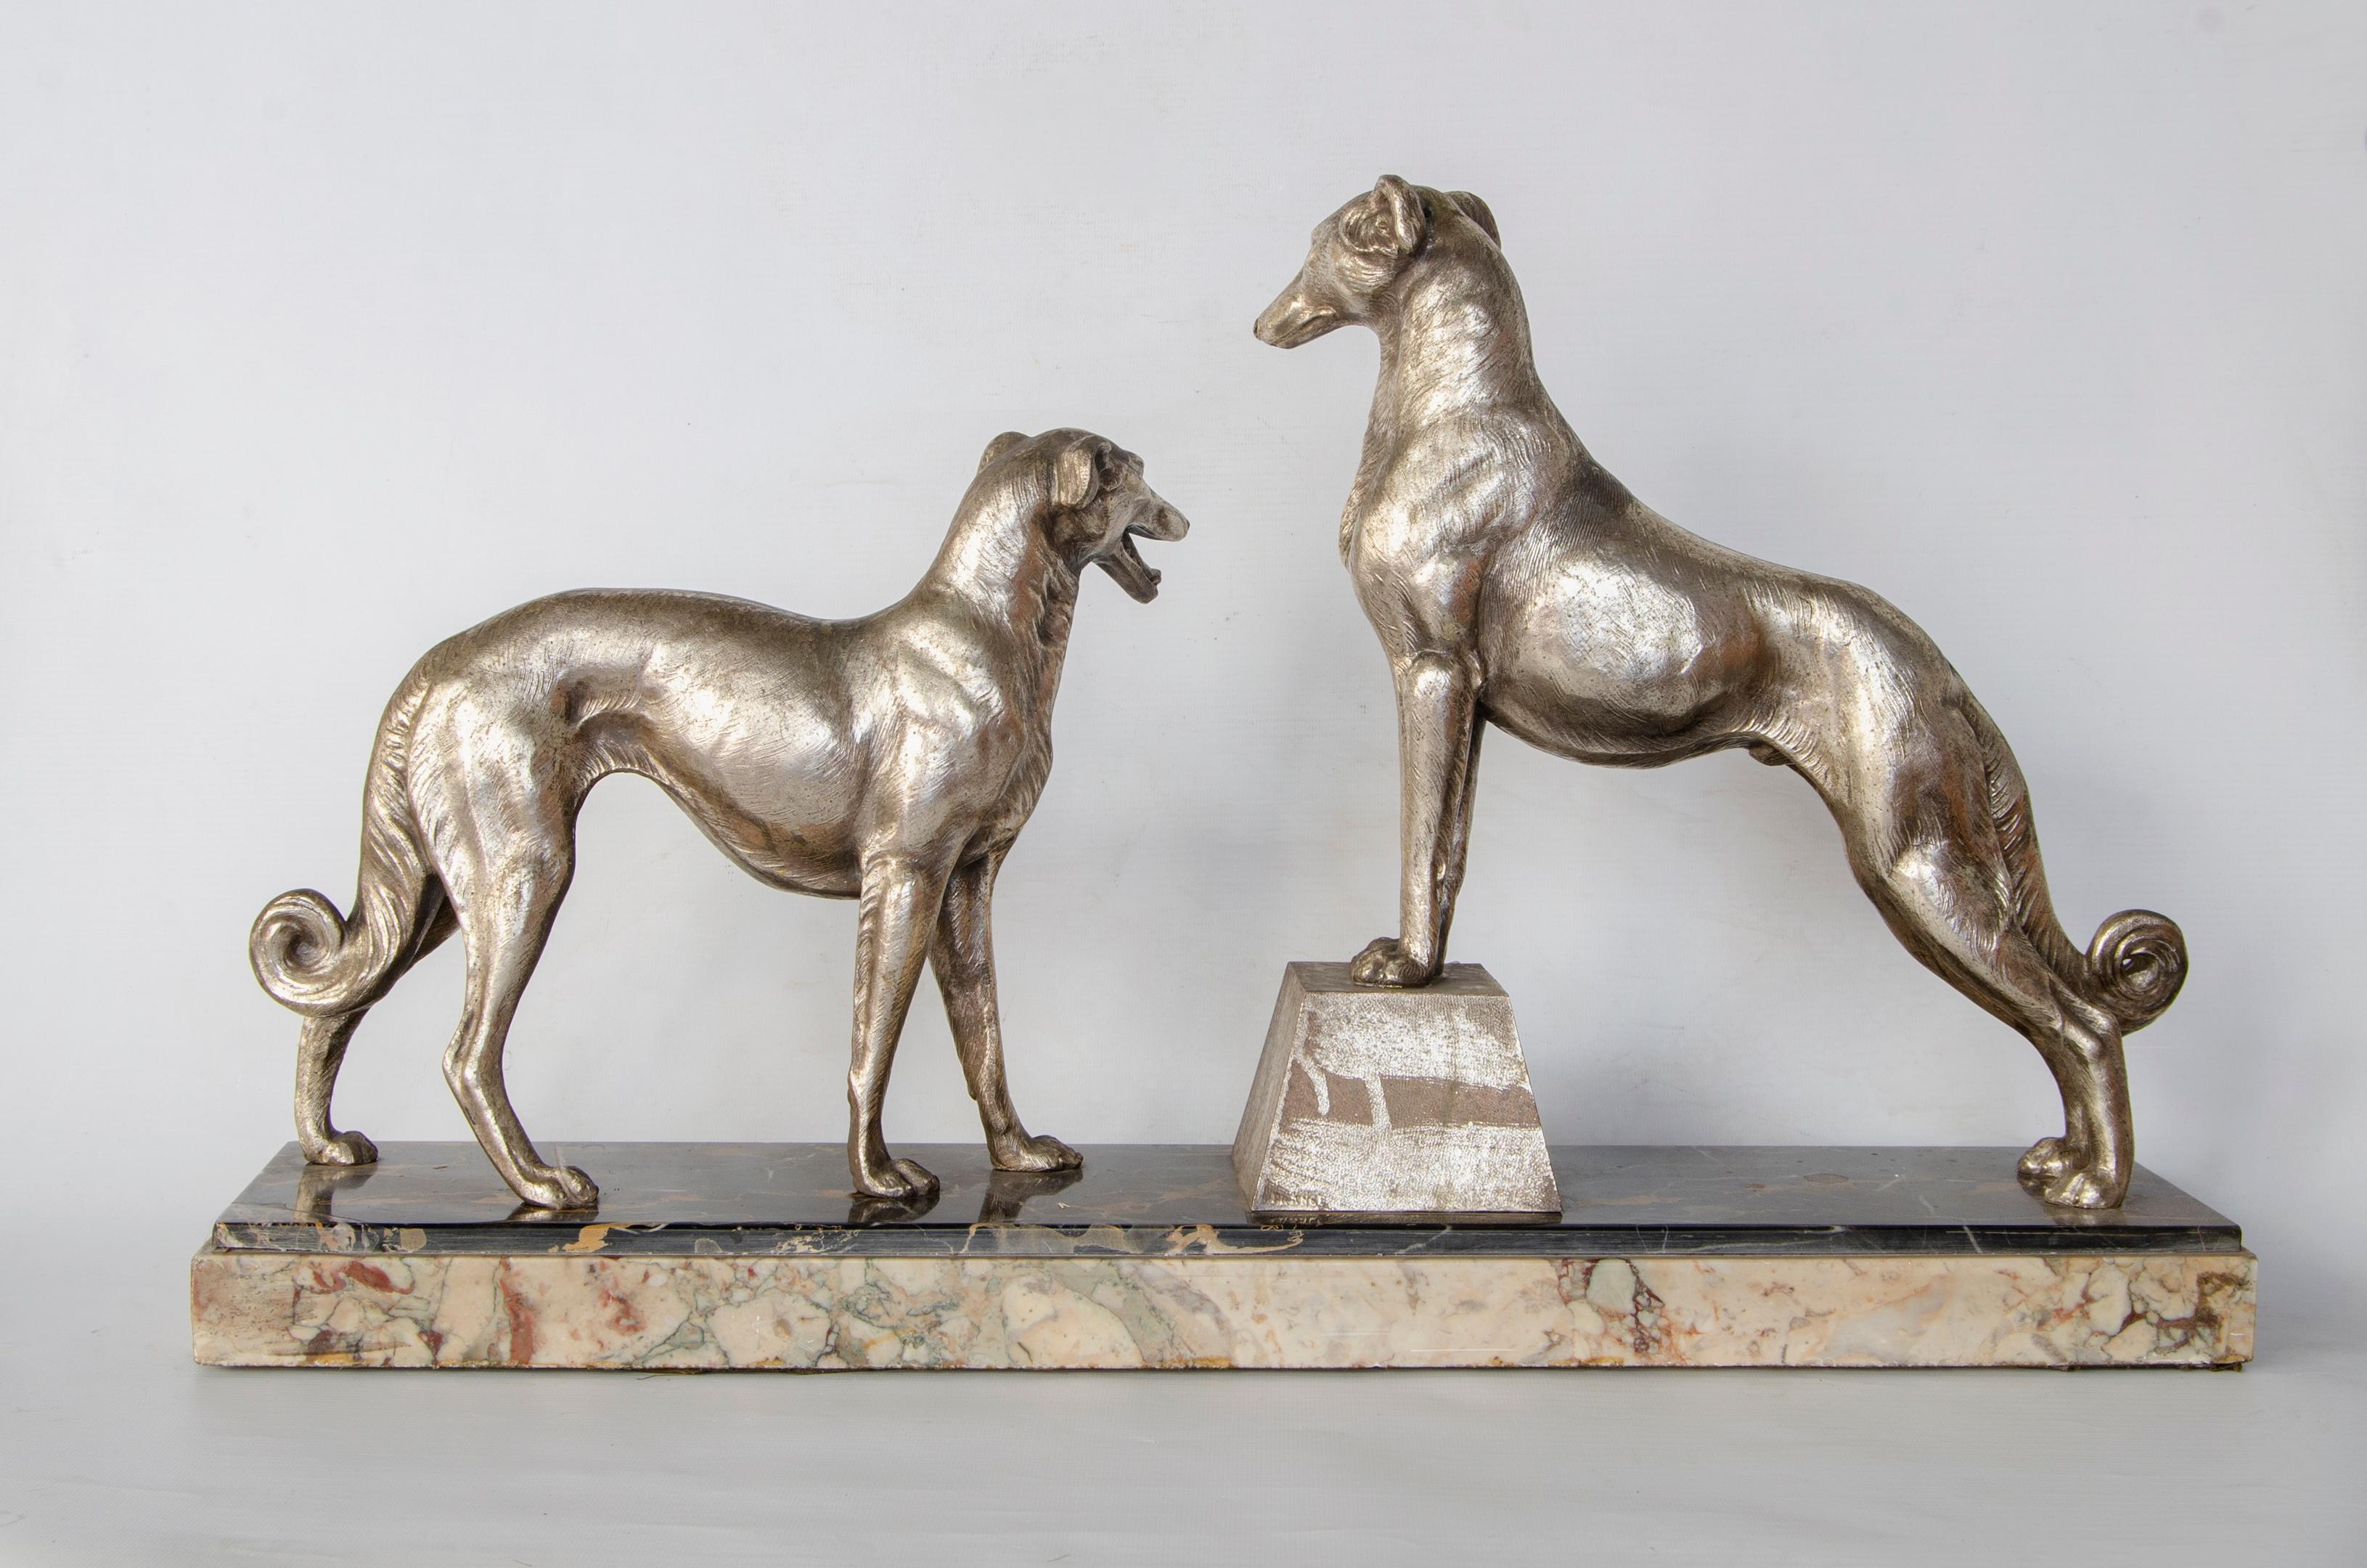 Art Deco pewter greyhound sculpture
electroplated origin France
French foundry,
circa 1930
natural wear
French foundry stamp.